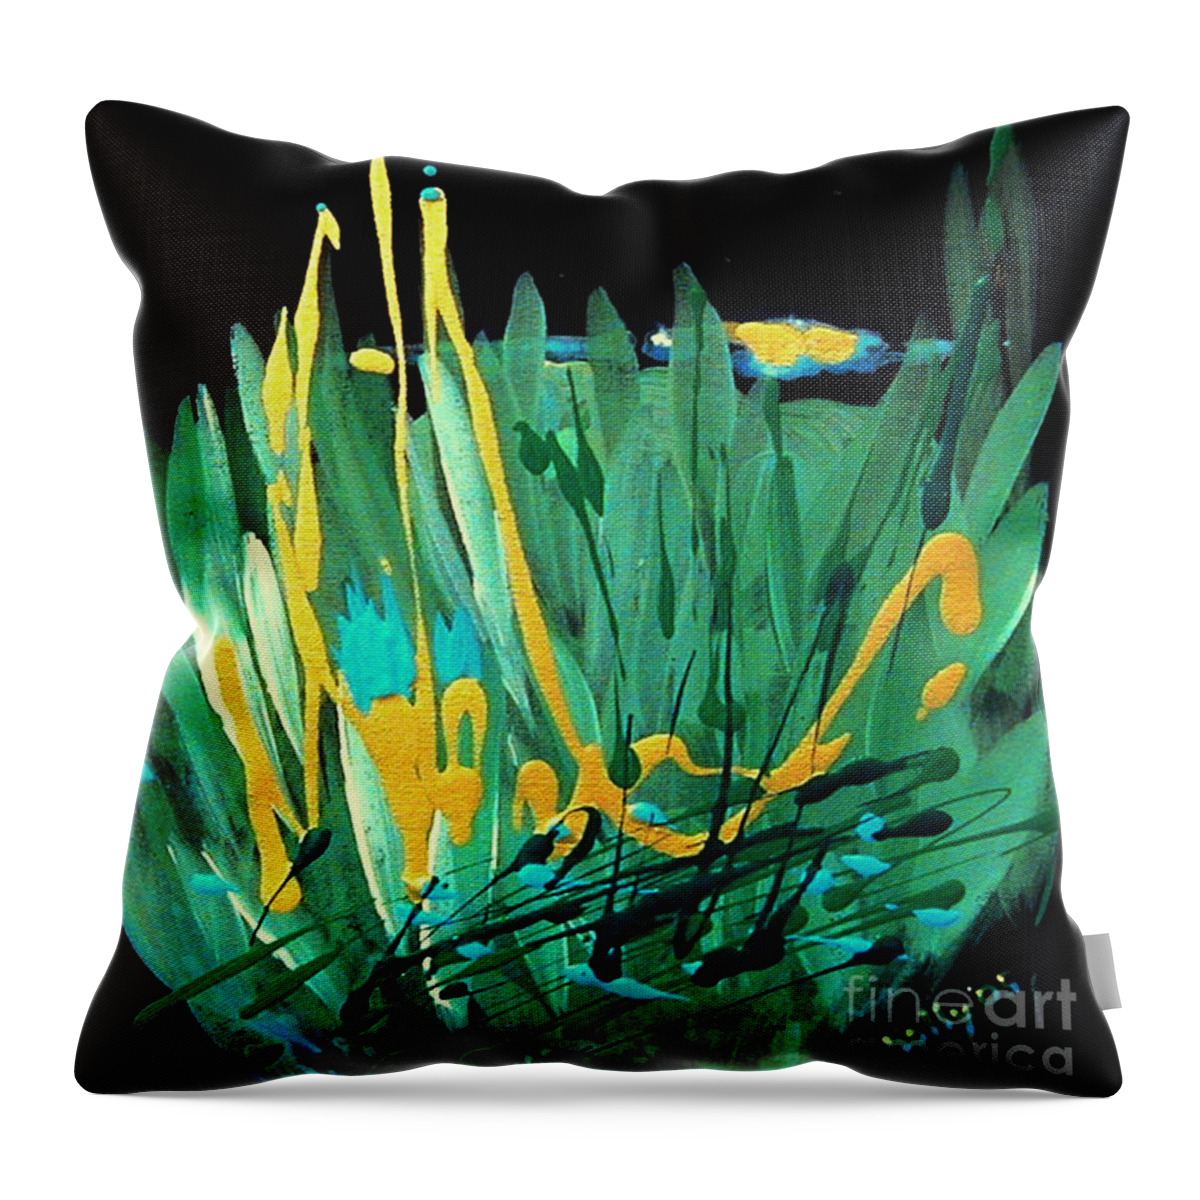 Urantia Throw Pillow featuring the painting Cosmic Island by Holly Carmichael